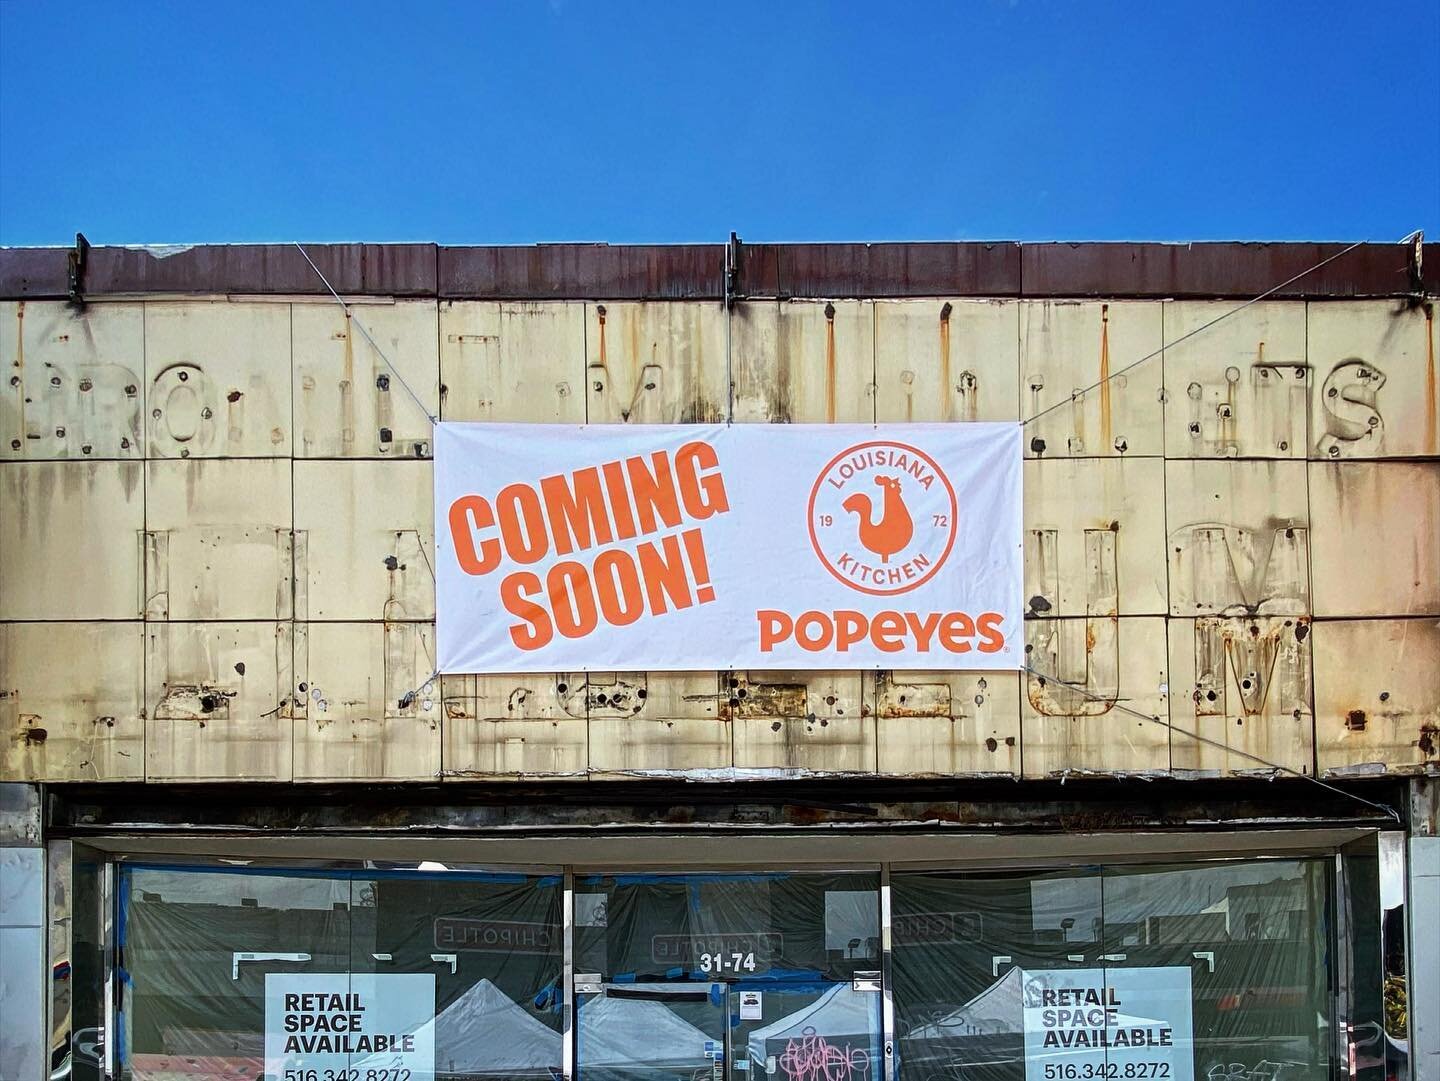 Not an ad for Popeyes, as I am more for what is underneath. I got a tip from @foxandcity about this recently exposed #ghostsign in Astoria, NY, and I knew I had to visit. Unfortunately I did not go immediately, because nothing happens that way. I wen